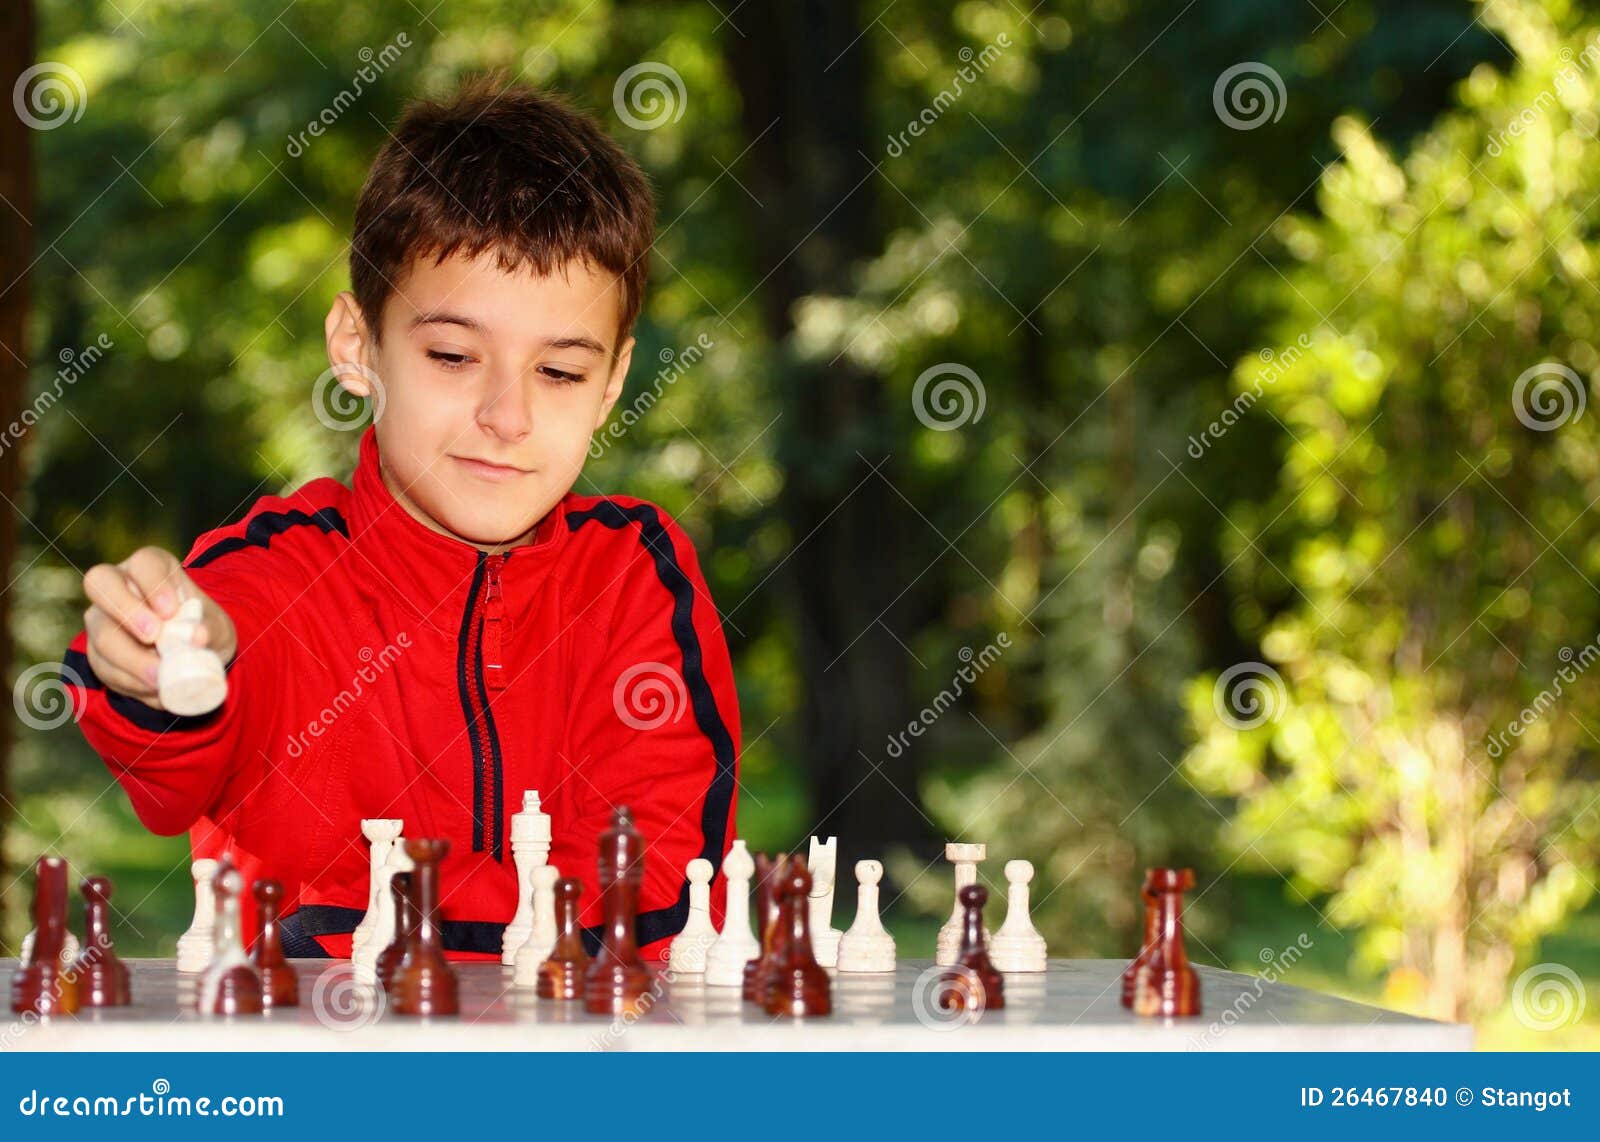 Young Boy Planning His Next Move during a Game of Chess Stock Photo - Image  of sports, india: 116808594